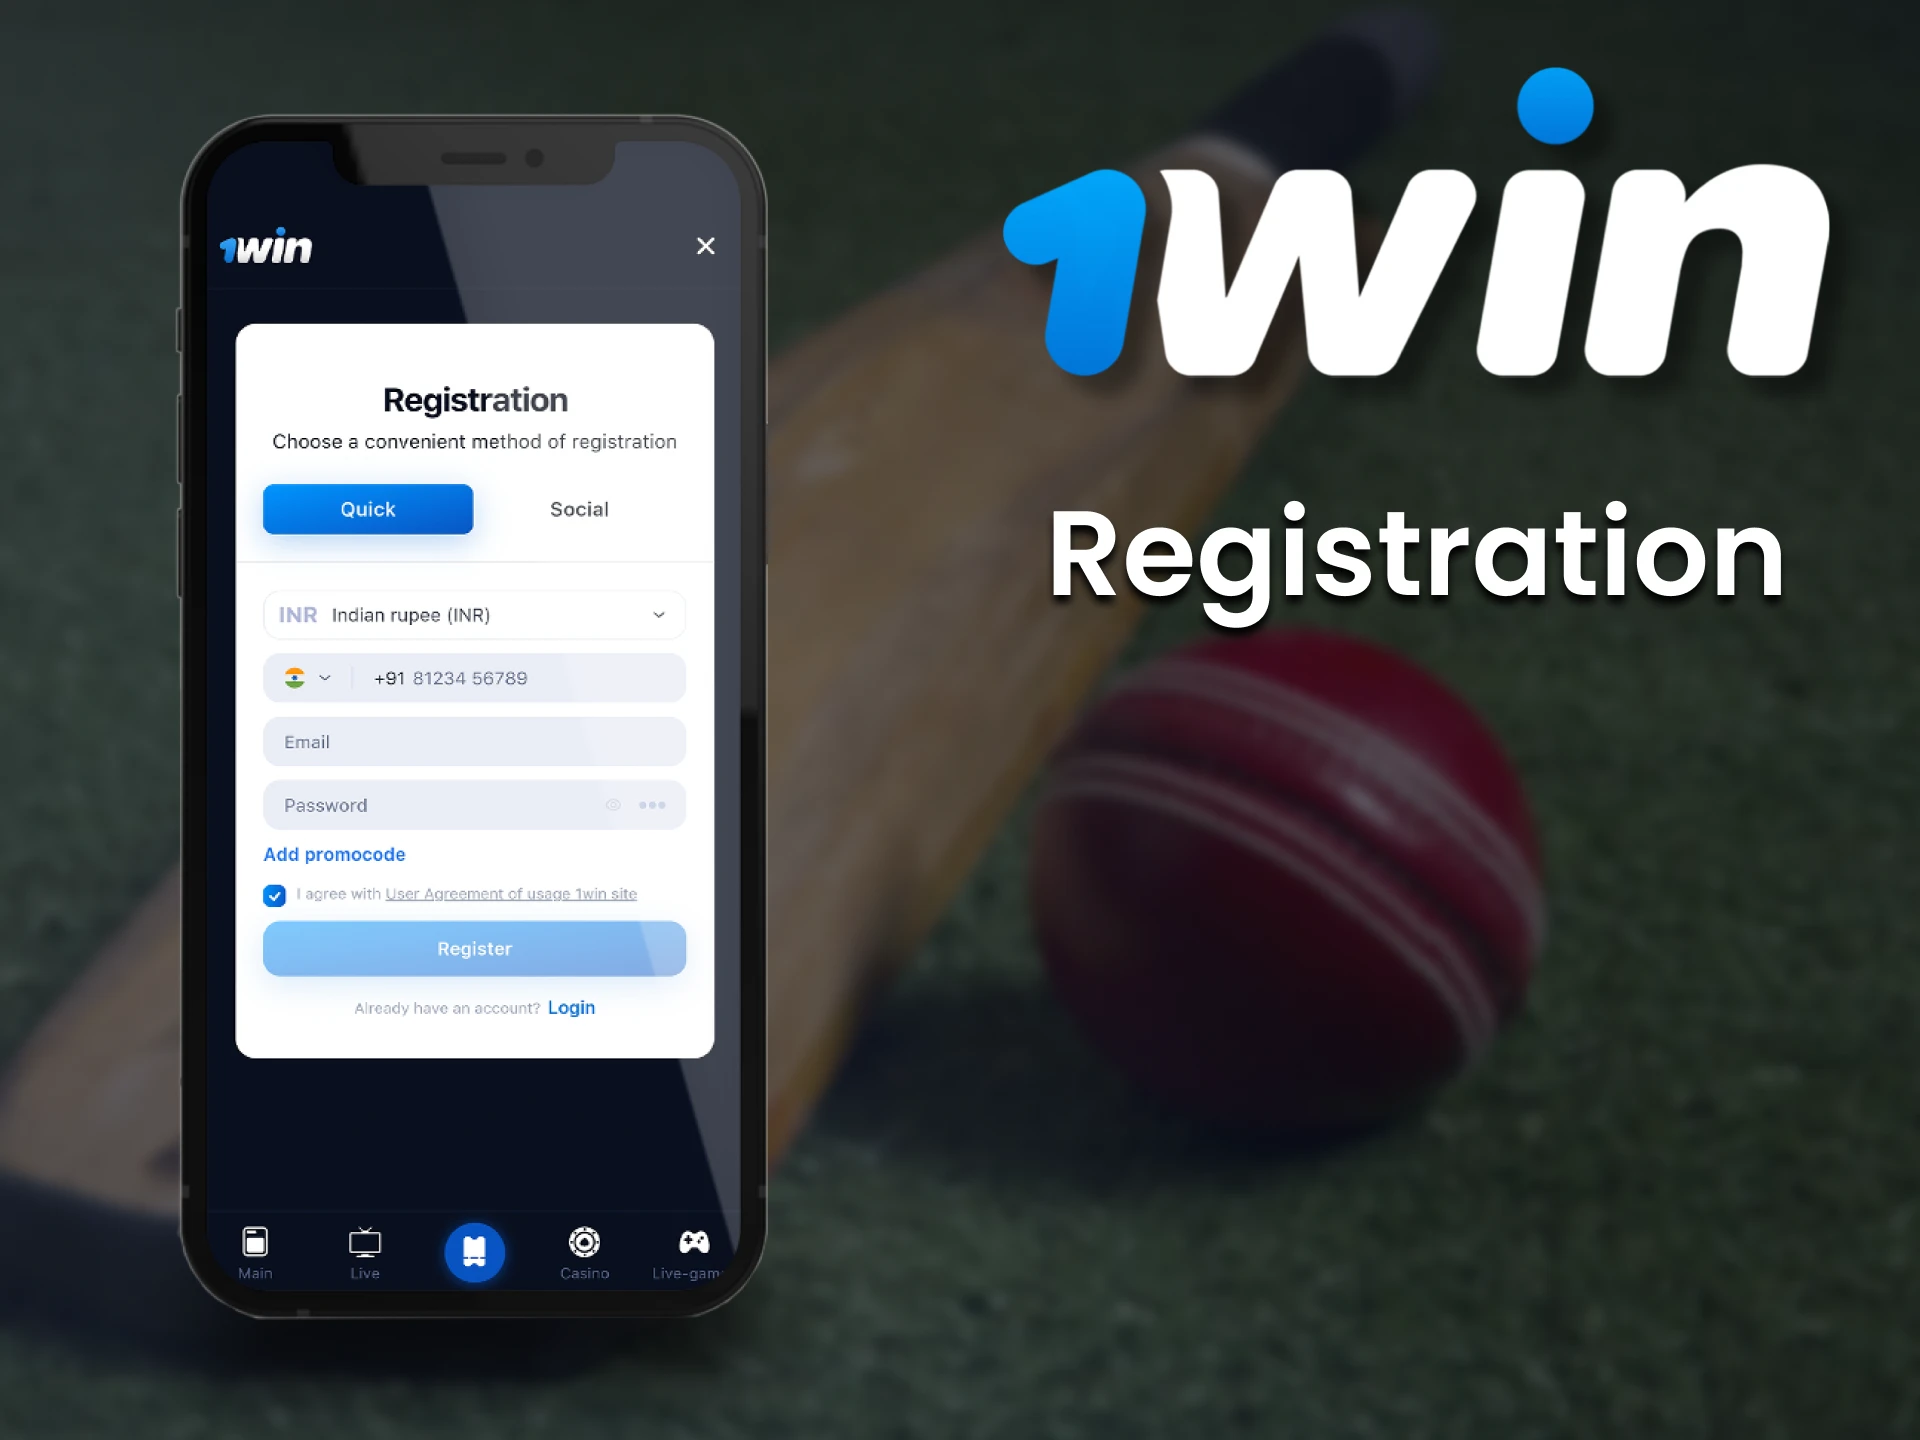 Go through the 1win account registration process through the application.